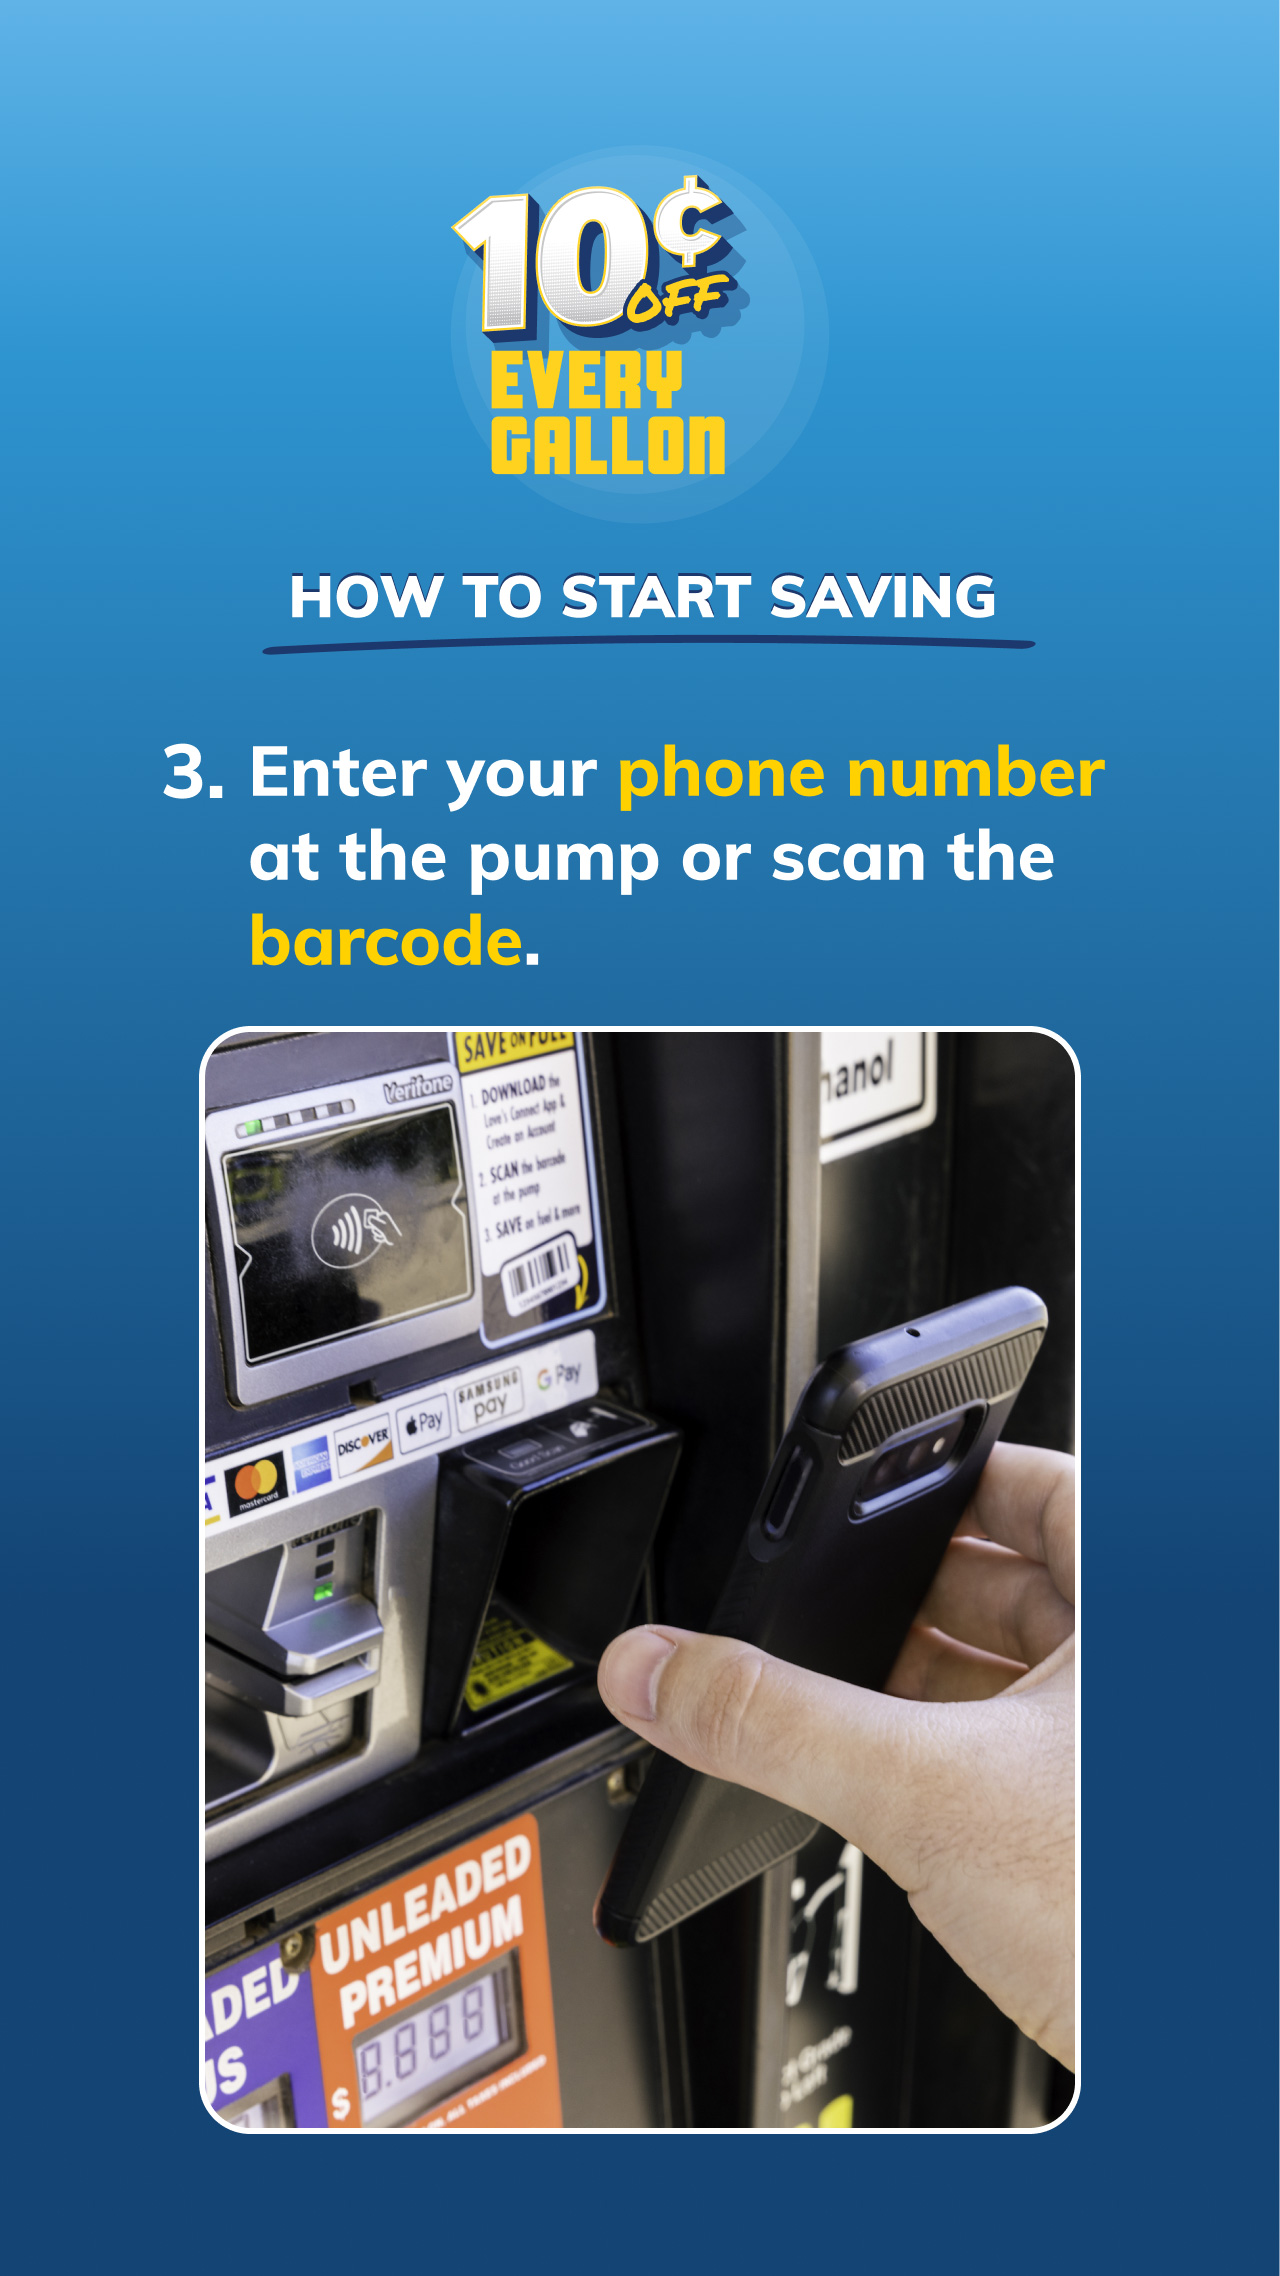 Step by step guide to saving 10¢ at the pump - scanning Love's Connect App barcode